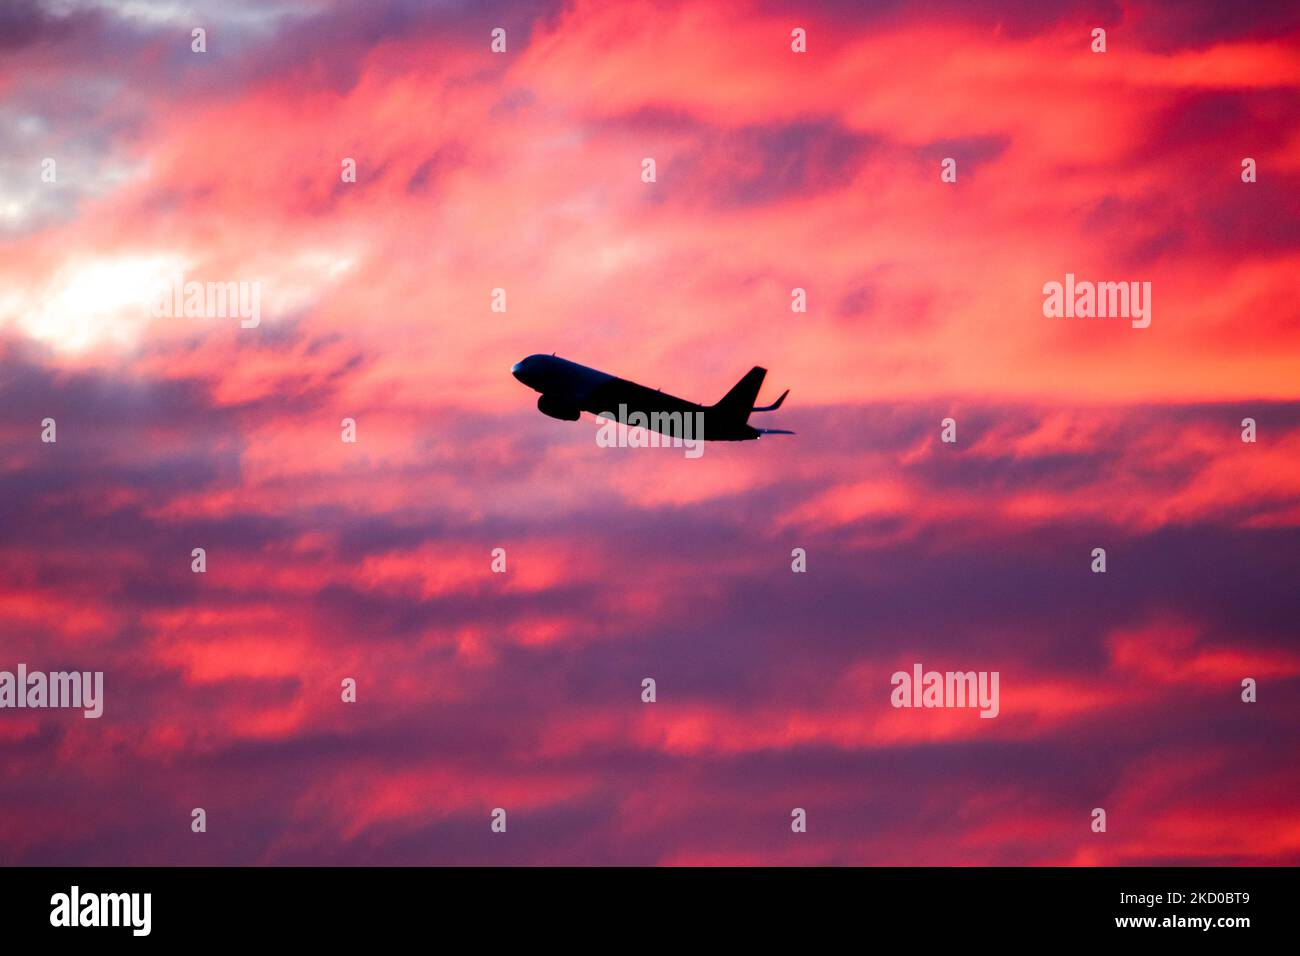 Aircraft silhouette symbol illustration photo during the magic hour. Dusk and sunset golden hour a colorful cloudy sky in Eindhoven. Images of Boeing and Airbus aircraft departing and flying in the